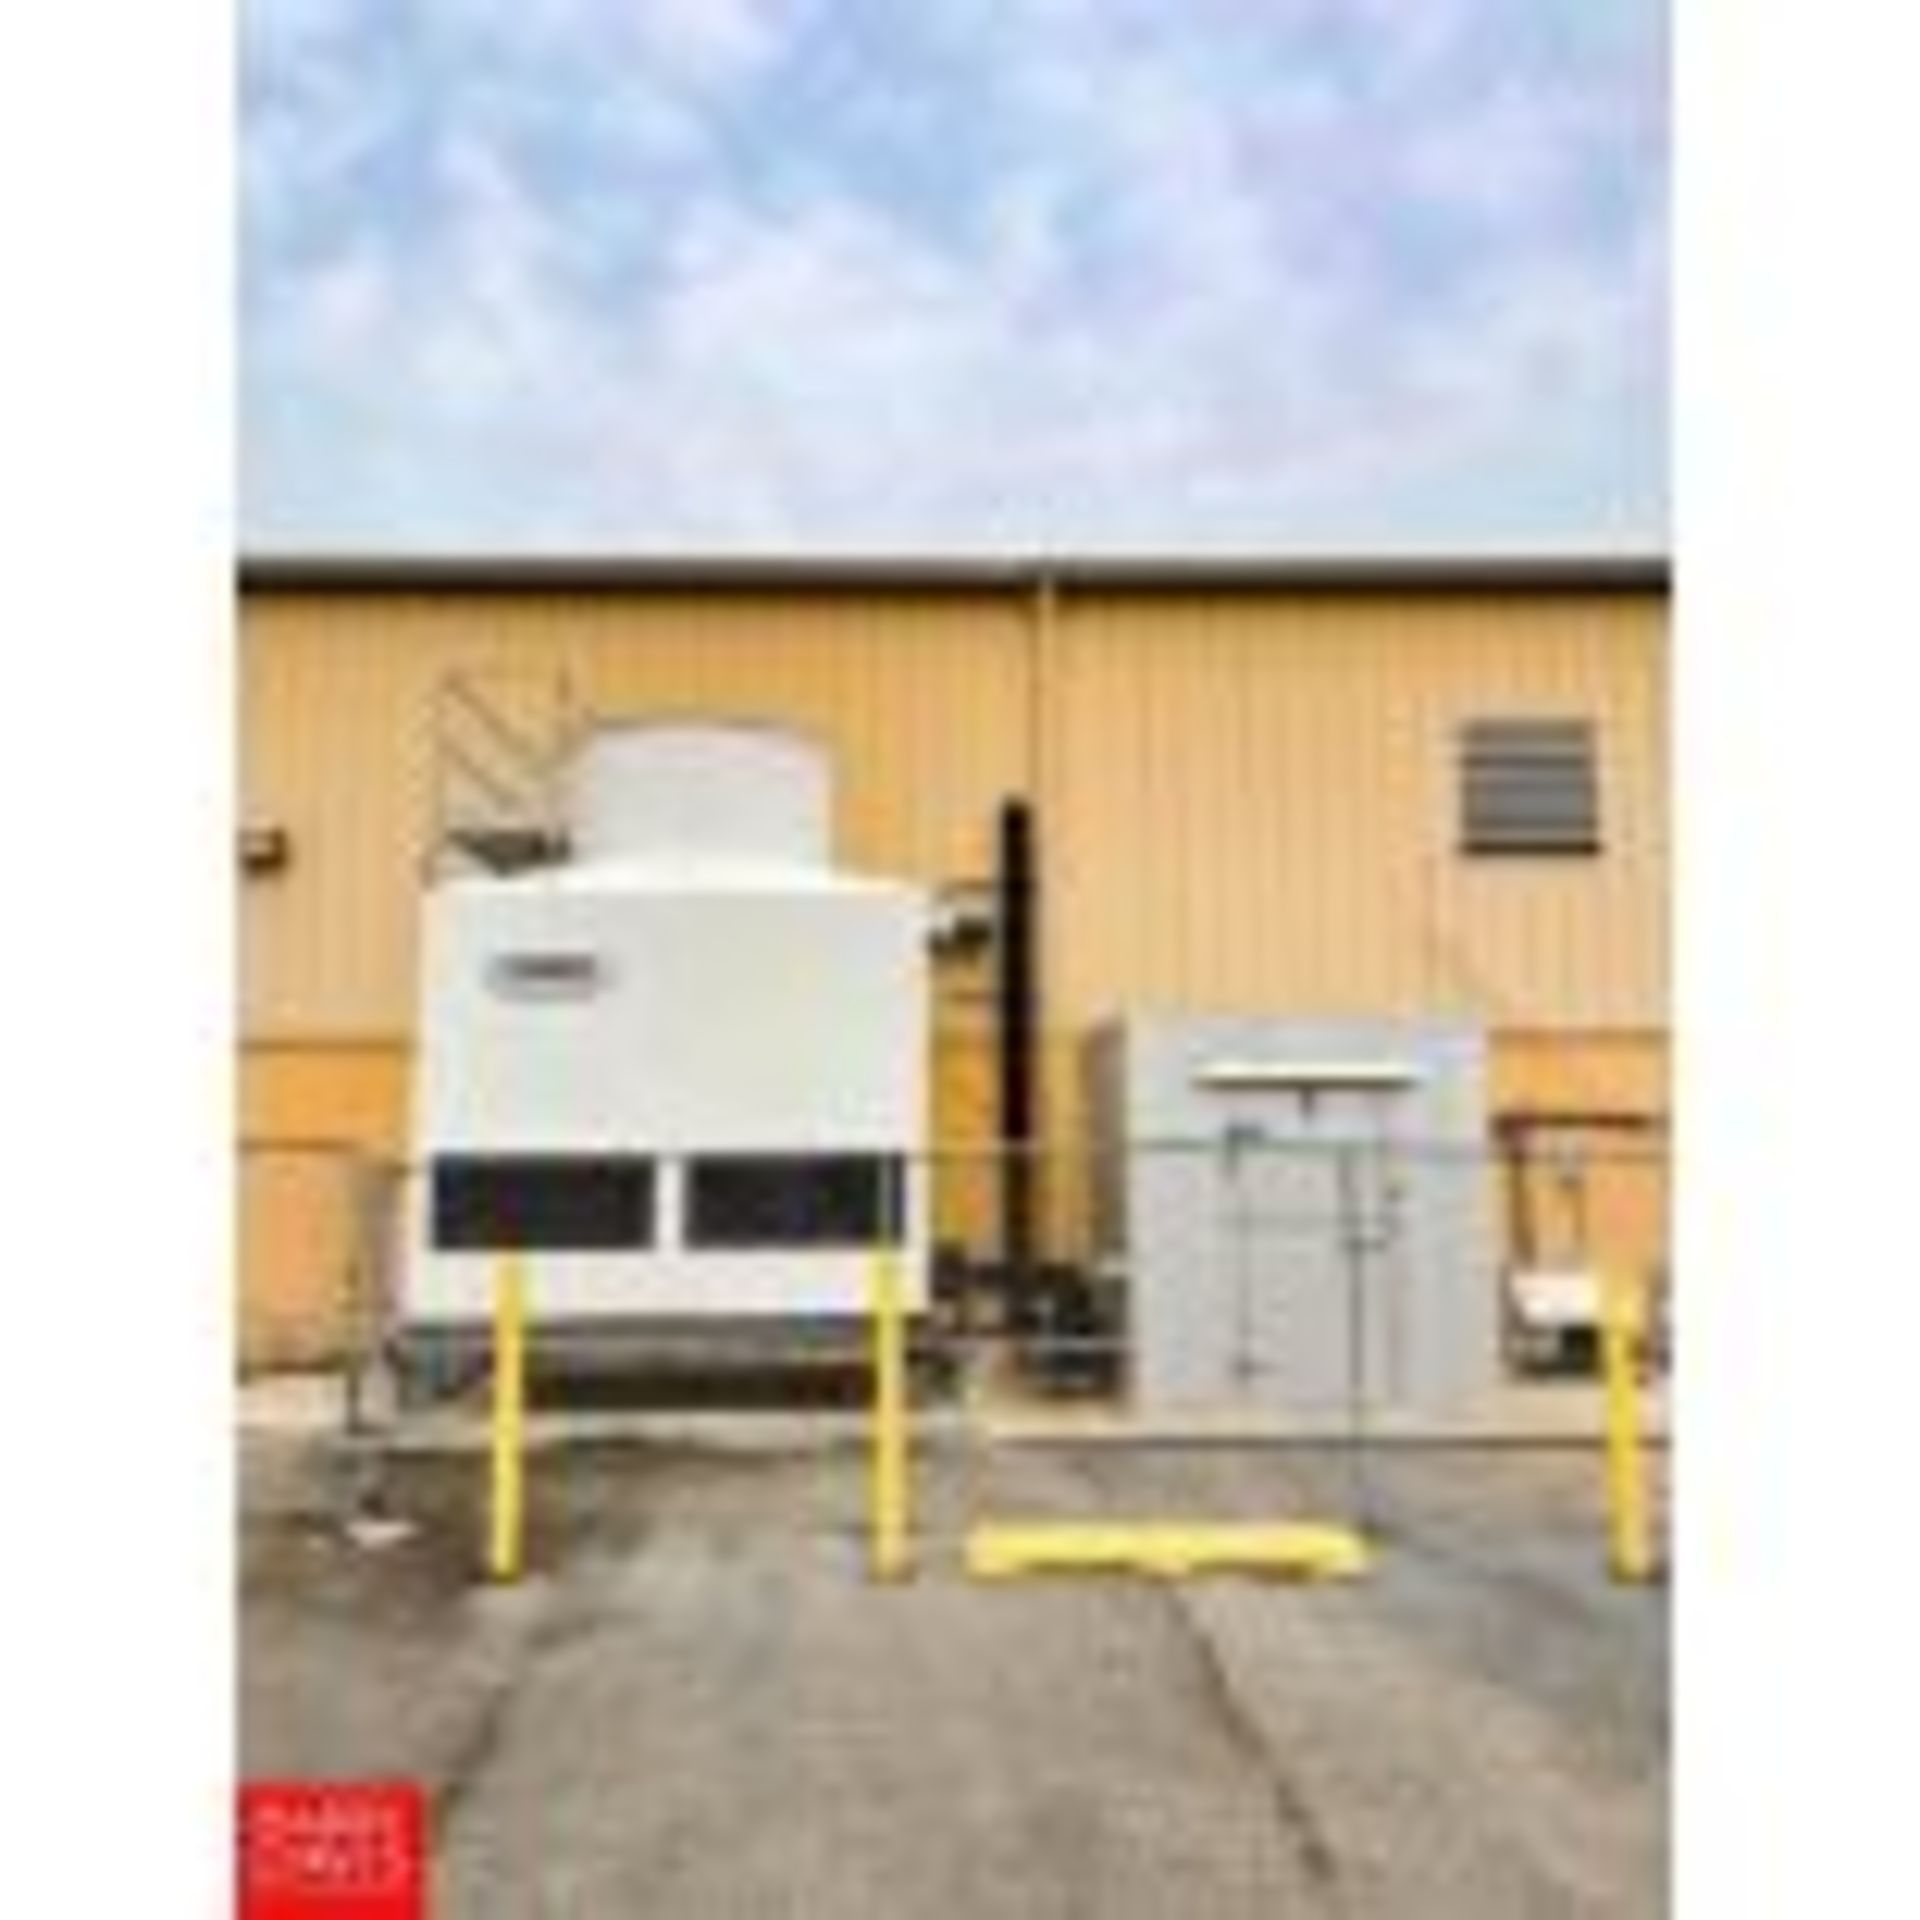 Reymsa 254.4 Ton Capacity Cooling Tower, Model RTU-810115-A, S/N M48M3R1143C20435080 with (3) - Image 2 of 2